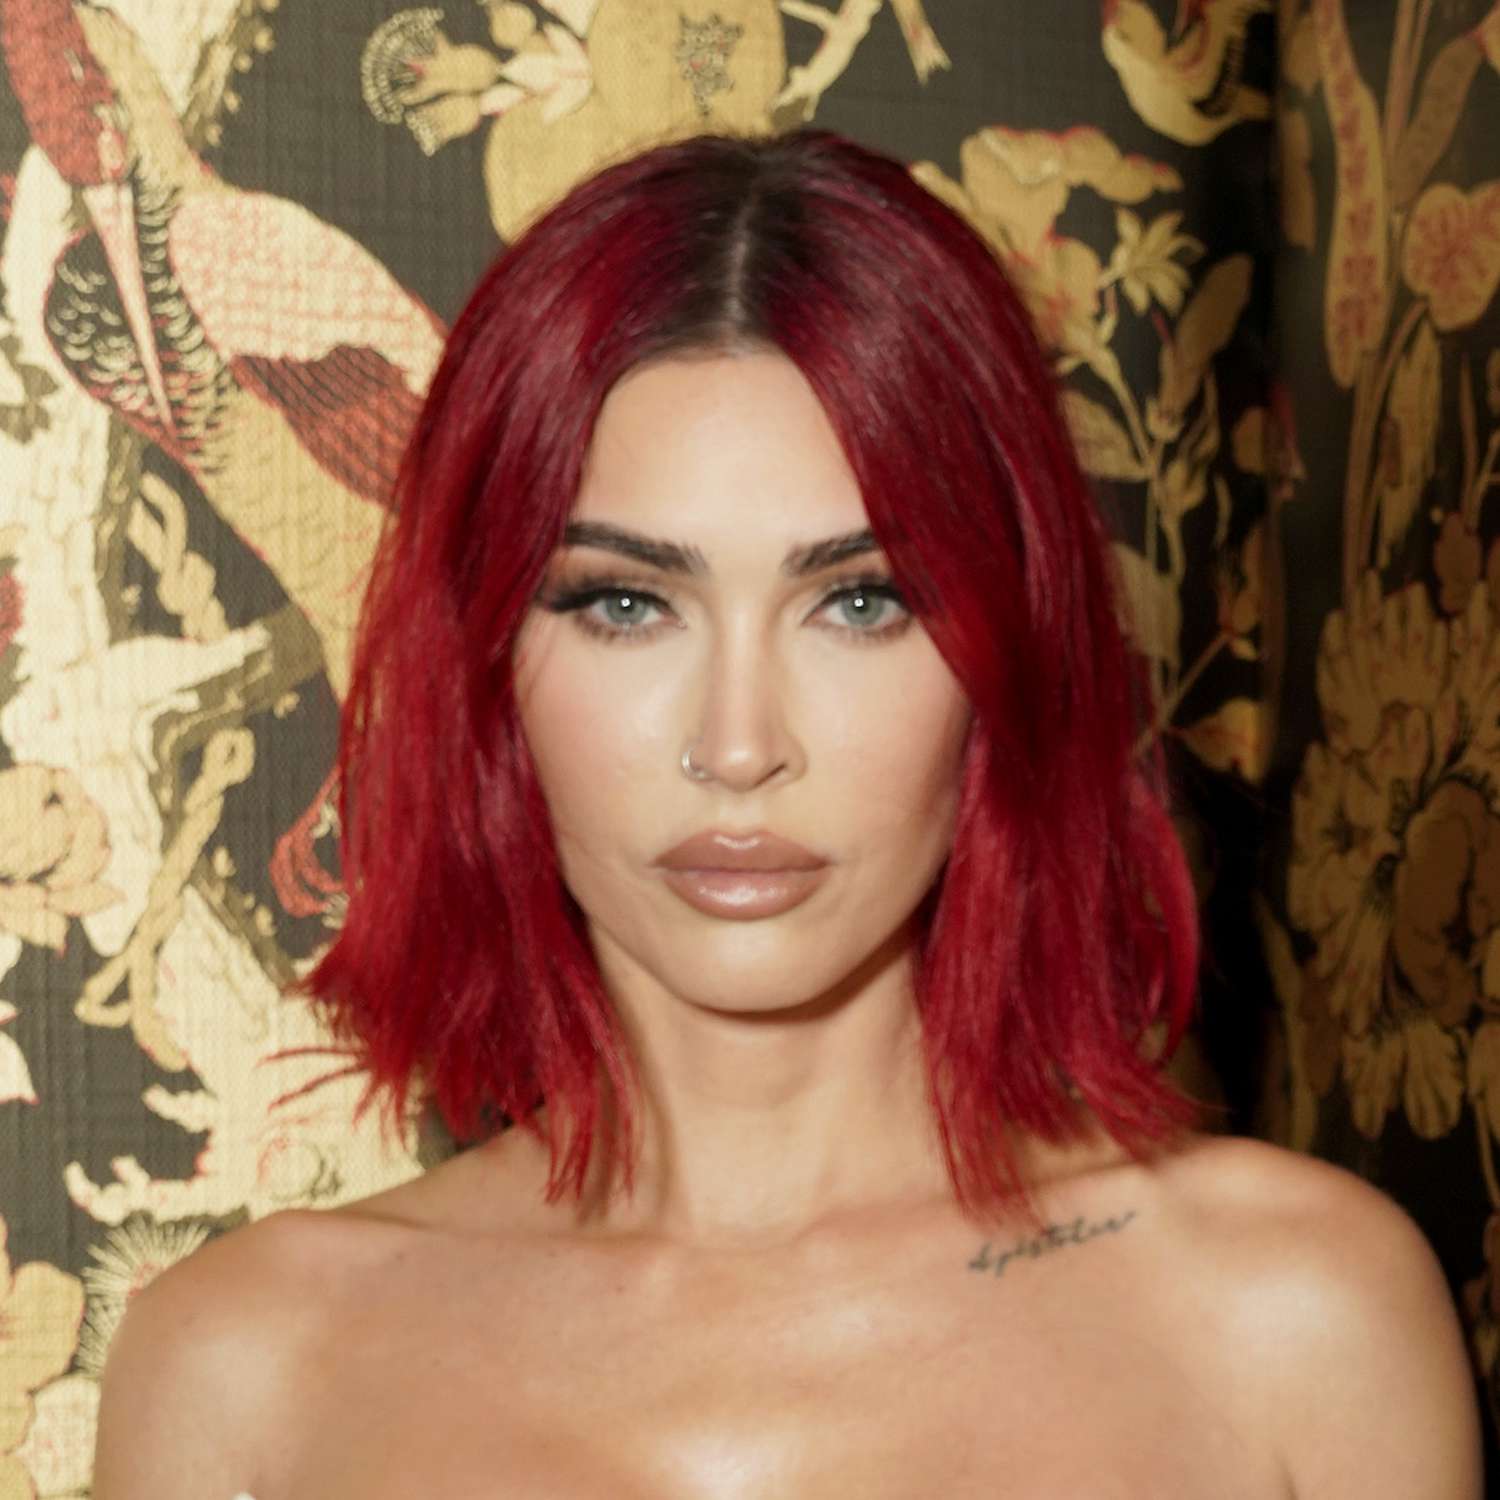 Megan Fox attends a GQ event in a bright red a-line haircut